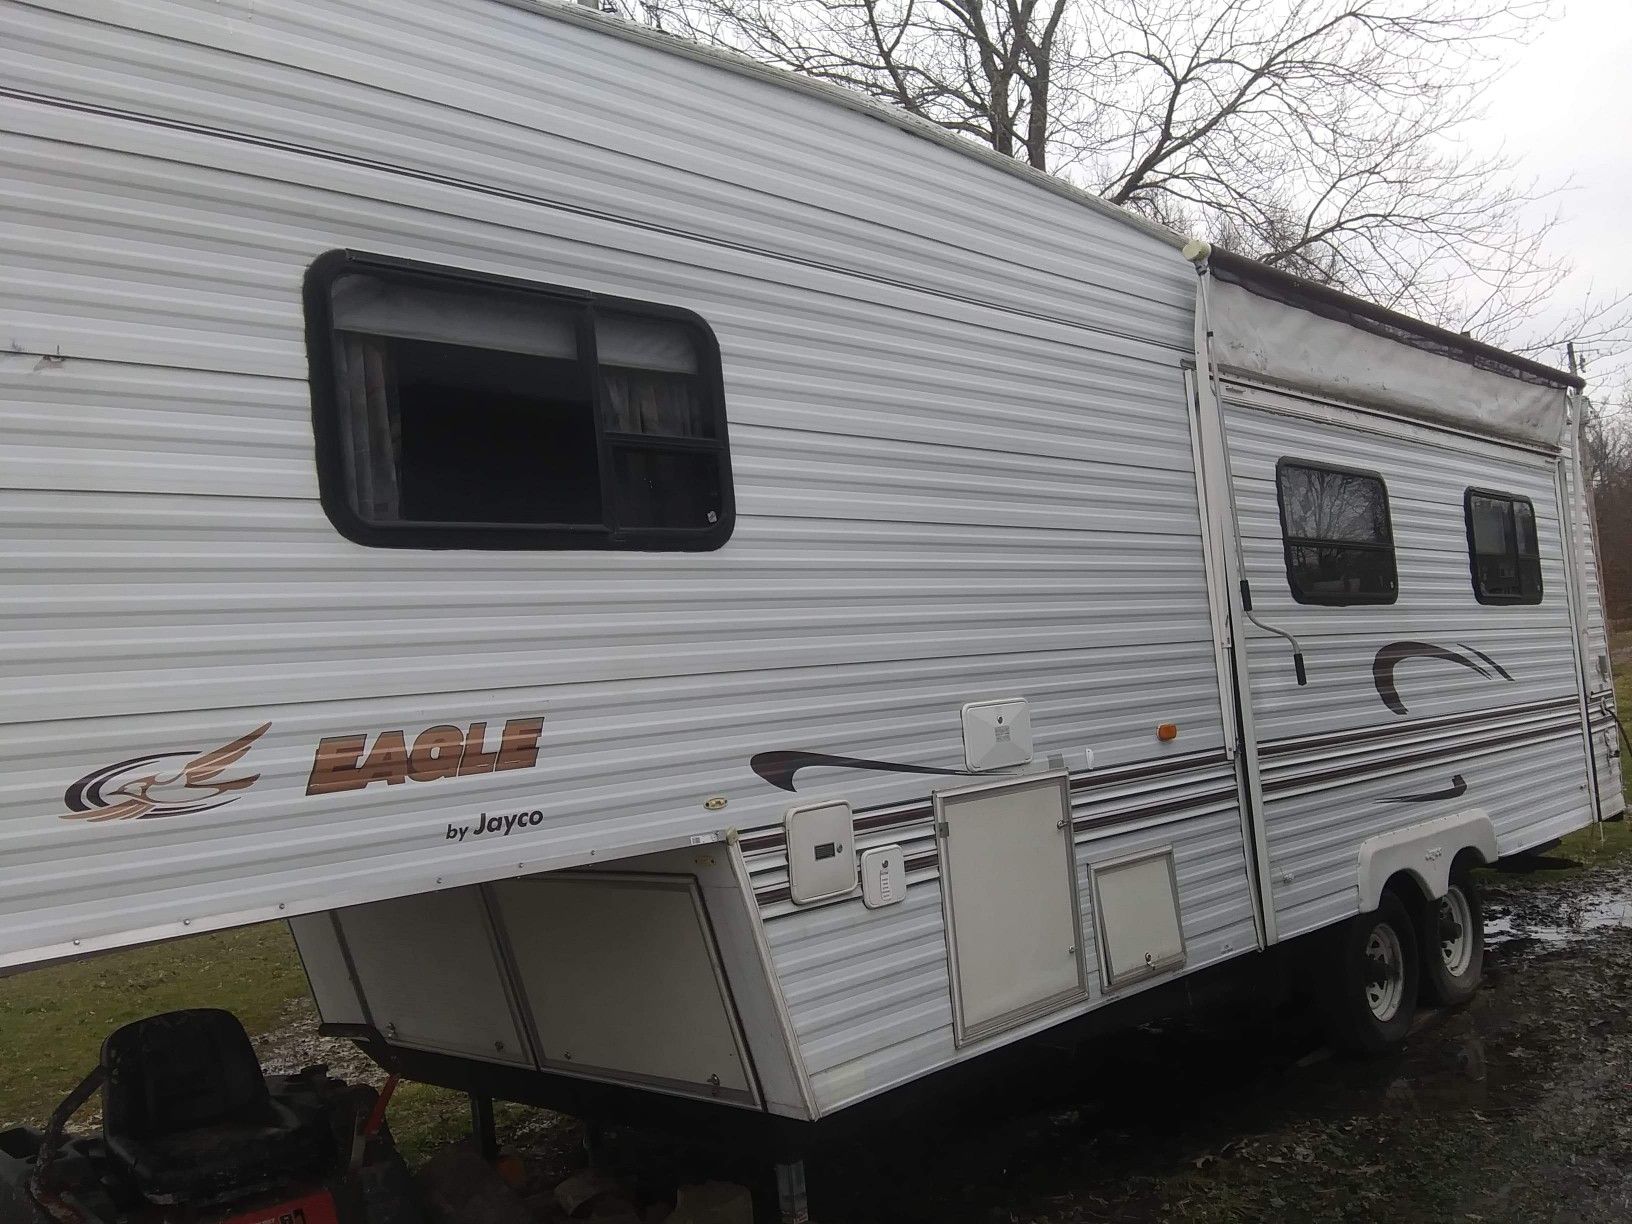 32 foot gooseneck camper for sale my dad wants 5500 or best offer sleeps 8 everything works on it and has a pop out where the kitchen table sets